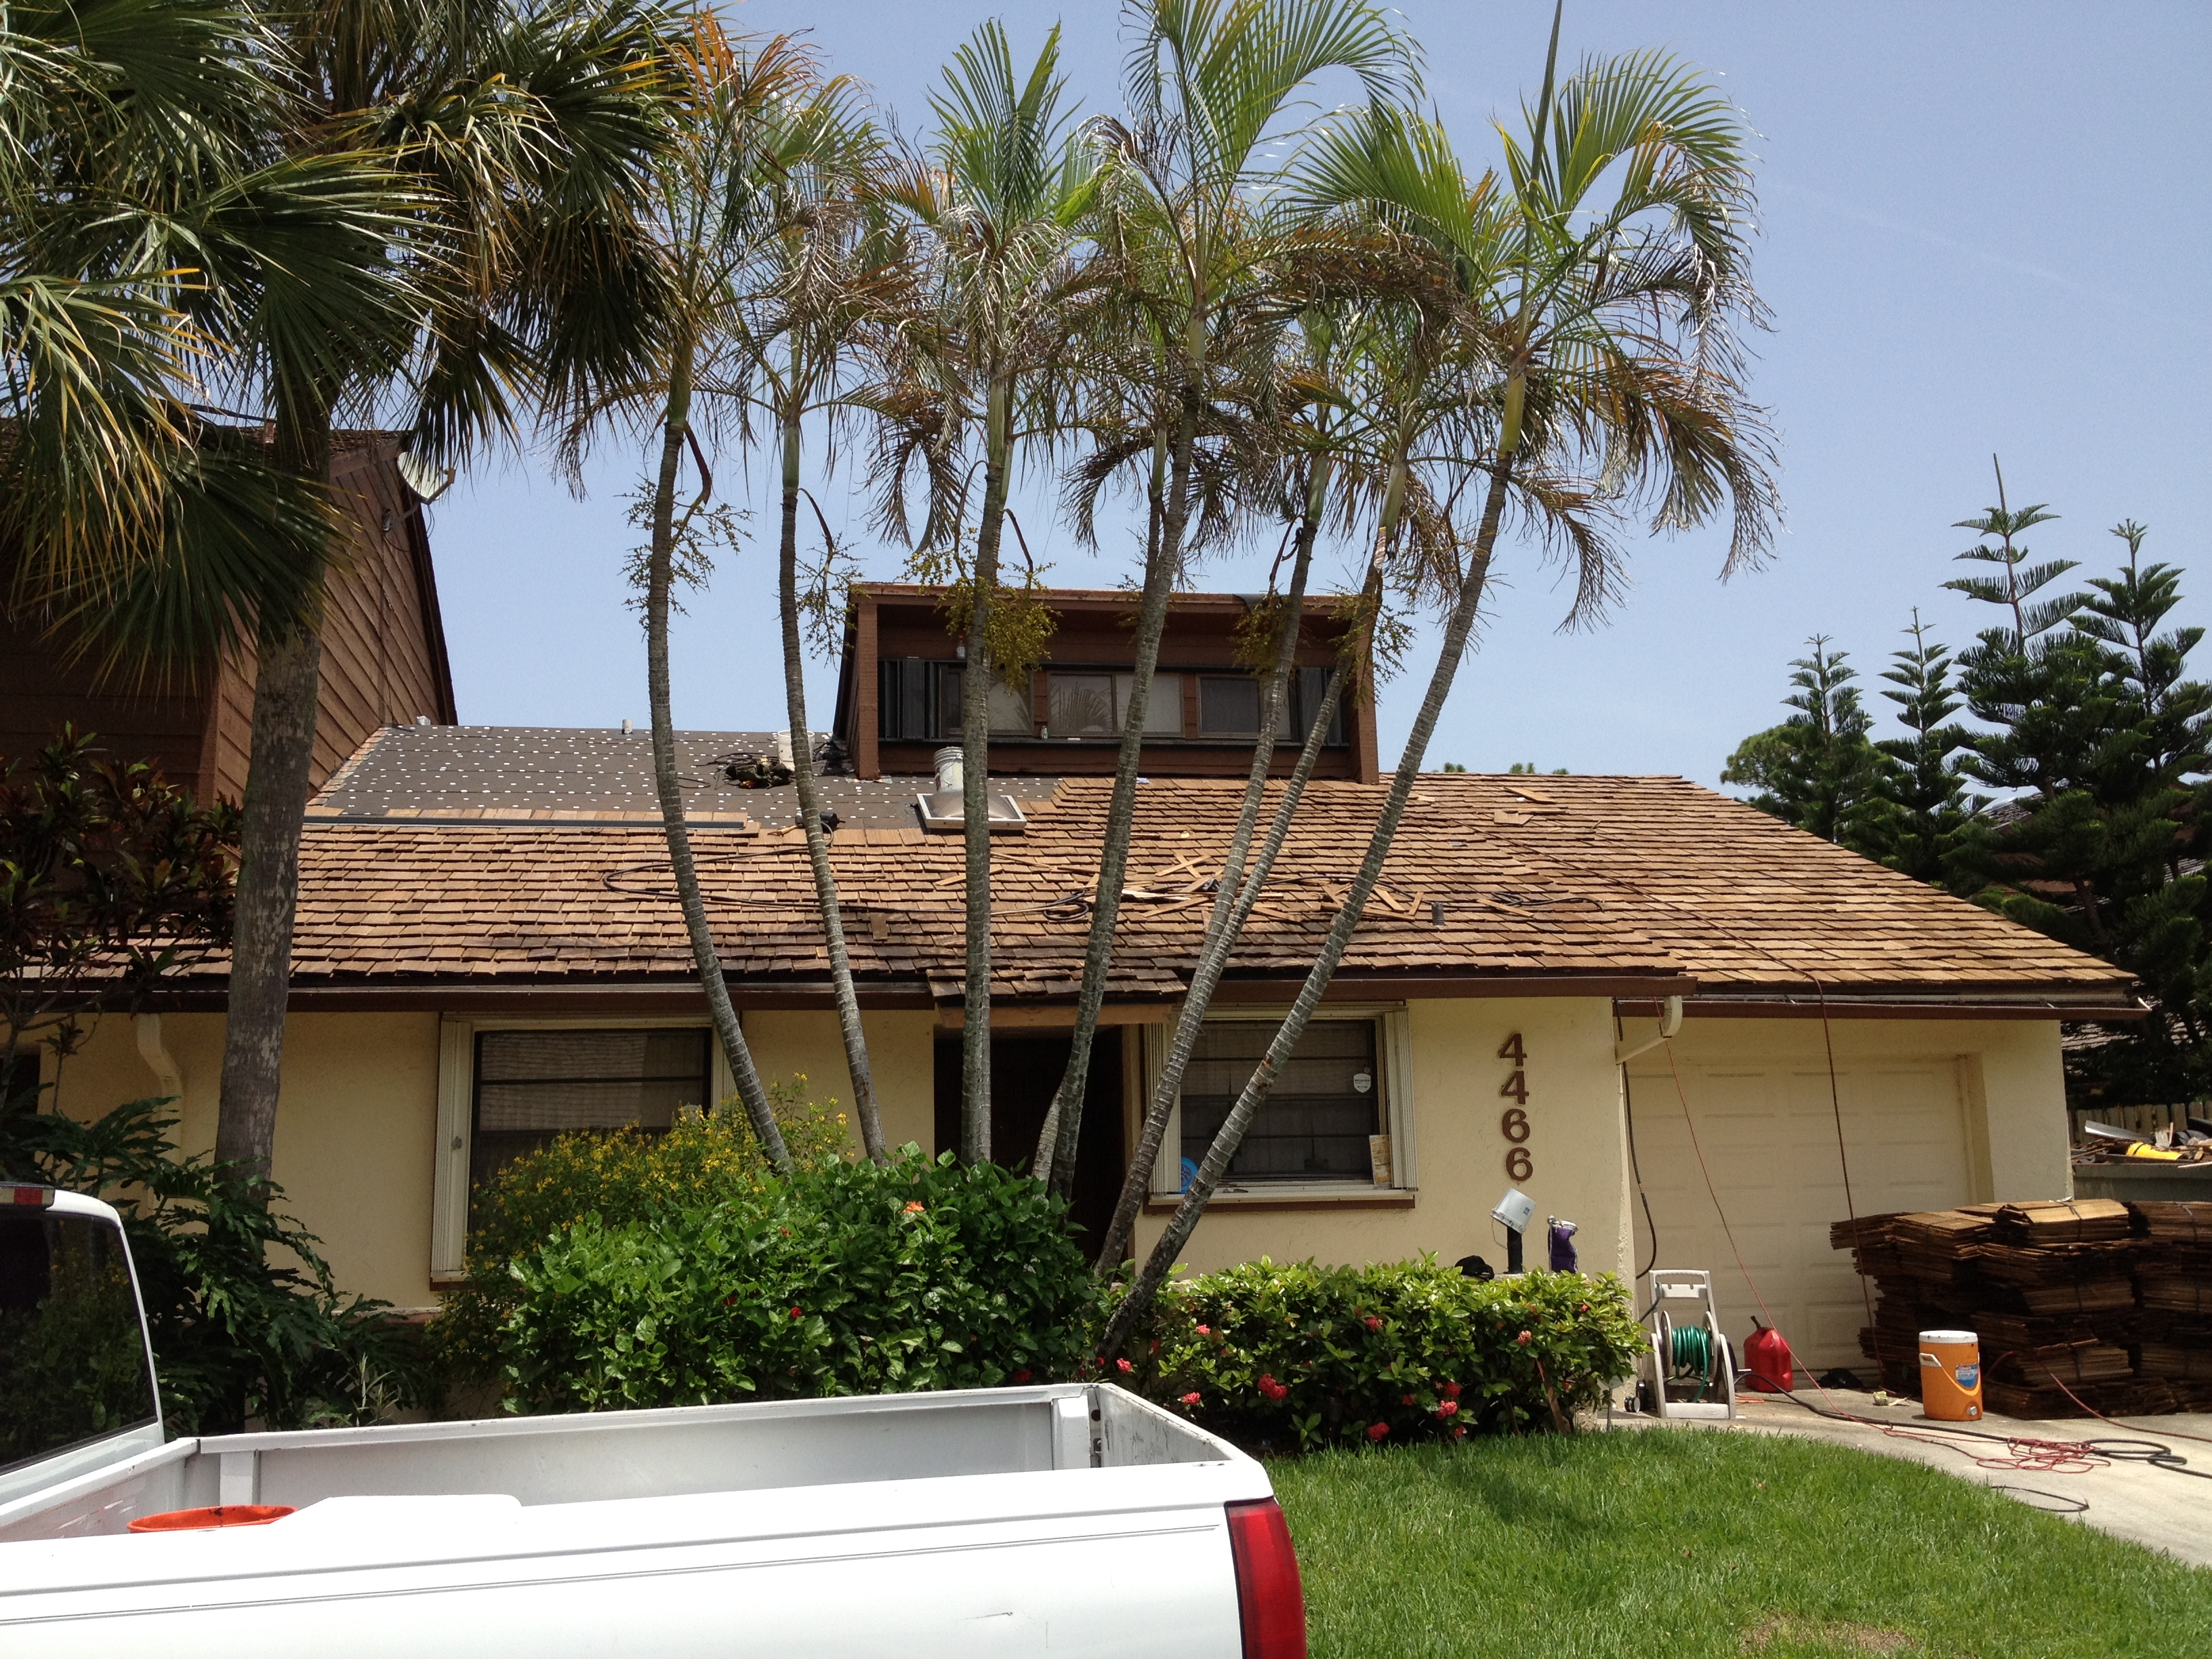 ABA Customs, Inc. 3-Dimensional Shingle Re-Roof Project in Wellington, Florida!